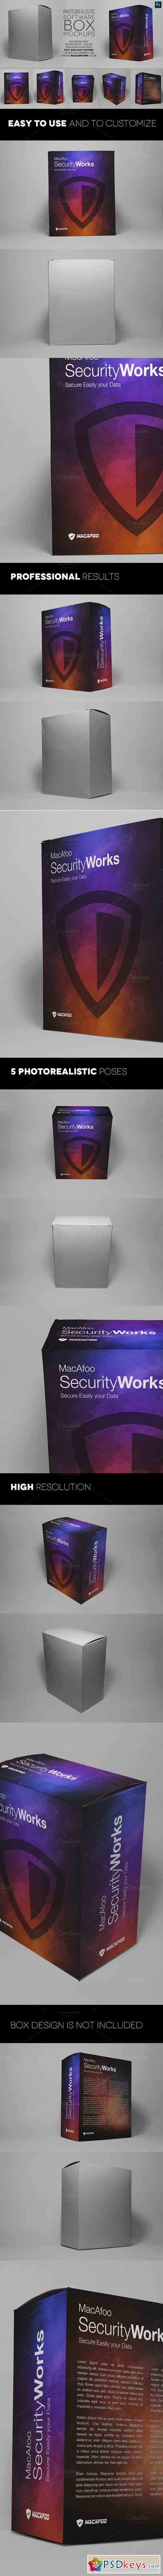 Software or Product Box Mockups 351206